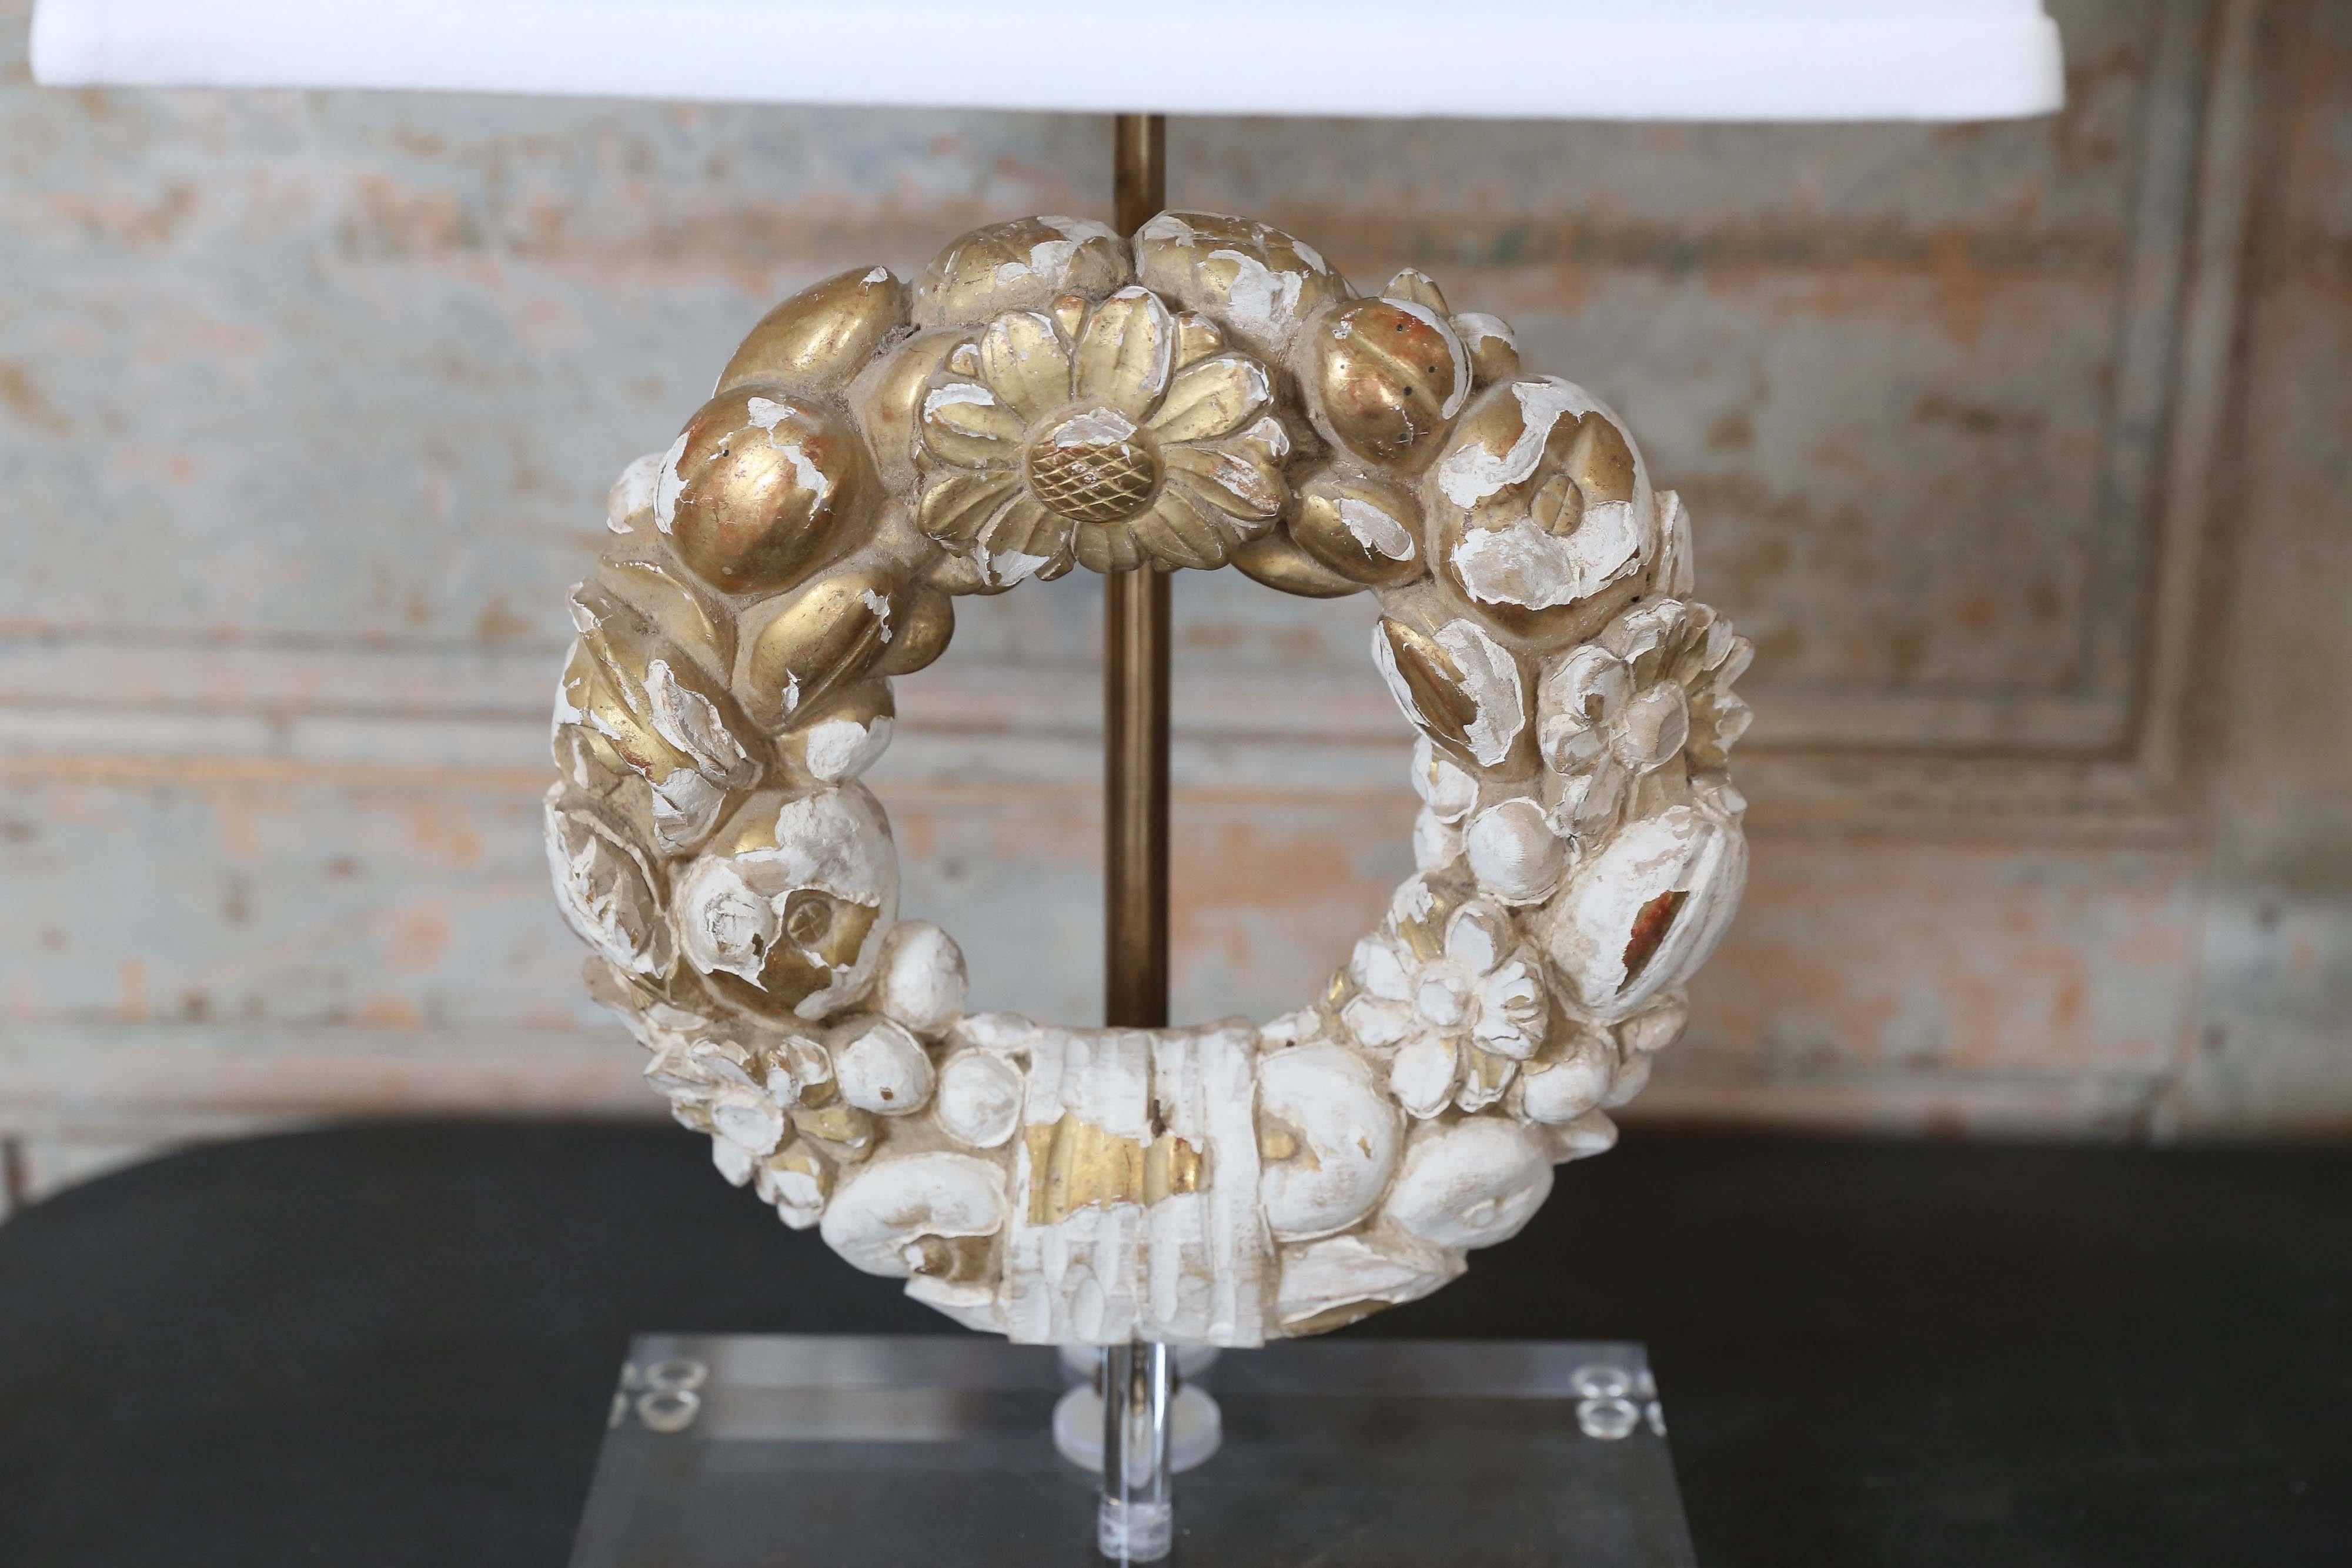 Giltwood wreath fragment table lamp on Lucite base, hand carved Italian giltwood architectural fragment (circa 1840) newly-wired for use within the USA as a custom table lamp. Sold with a complementary linen shade (measurements include